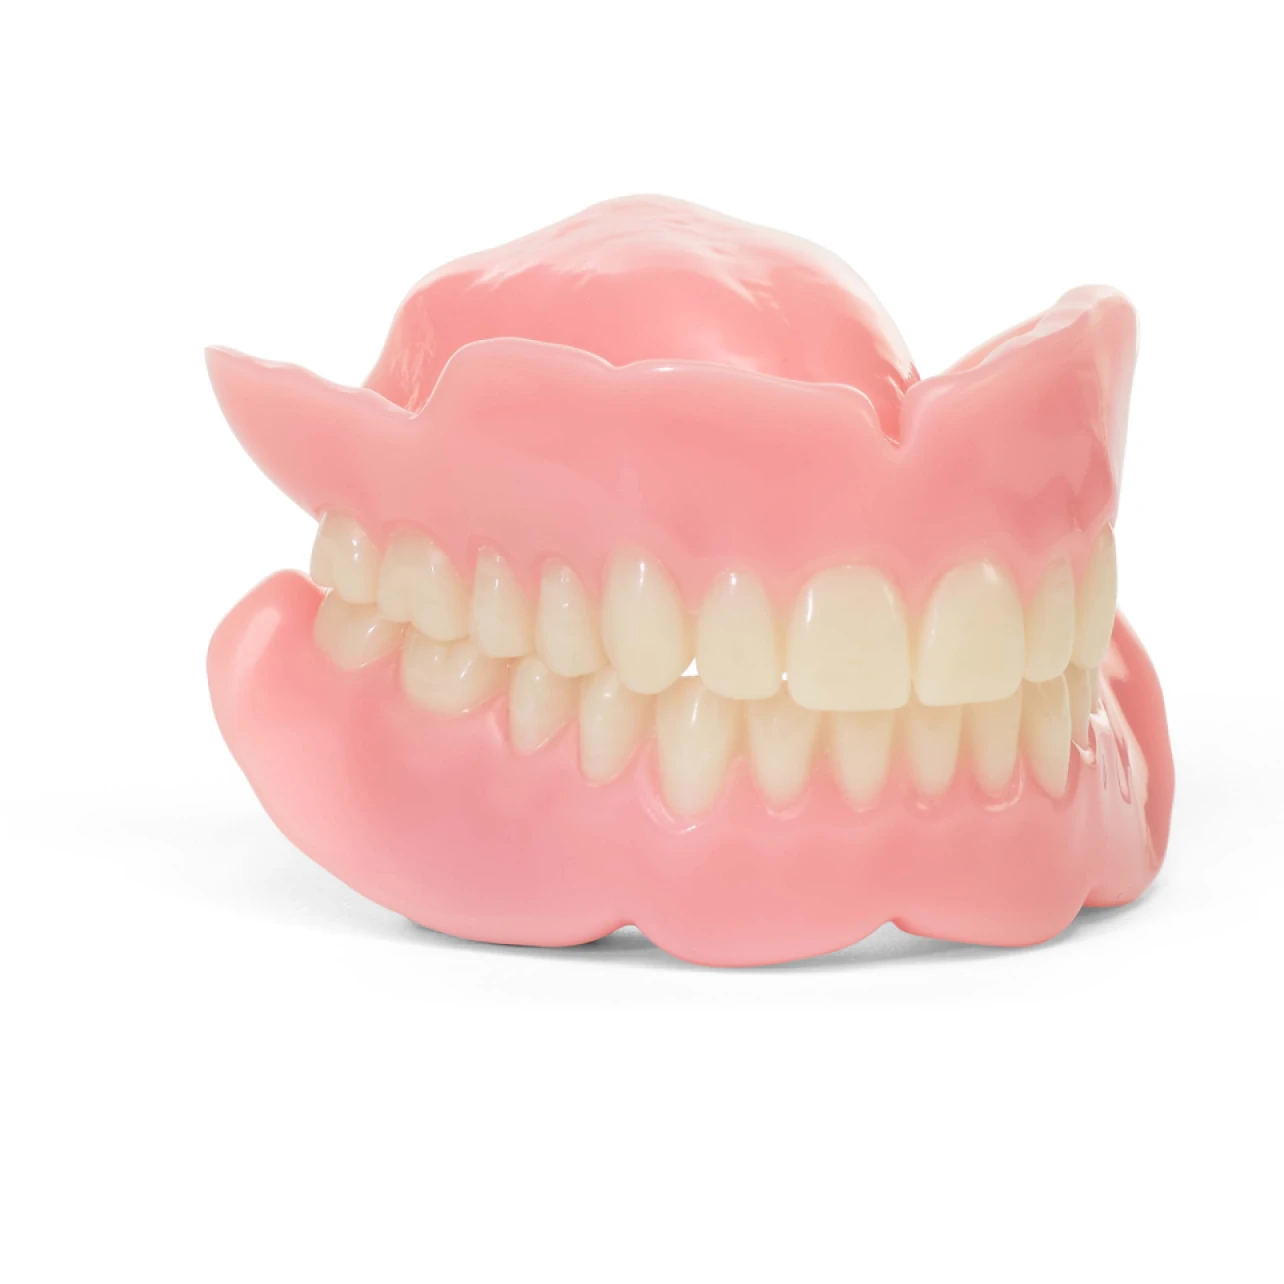 A graphic showcasing a full set of traditional dentures on a white background.